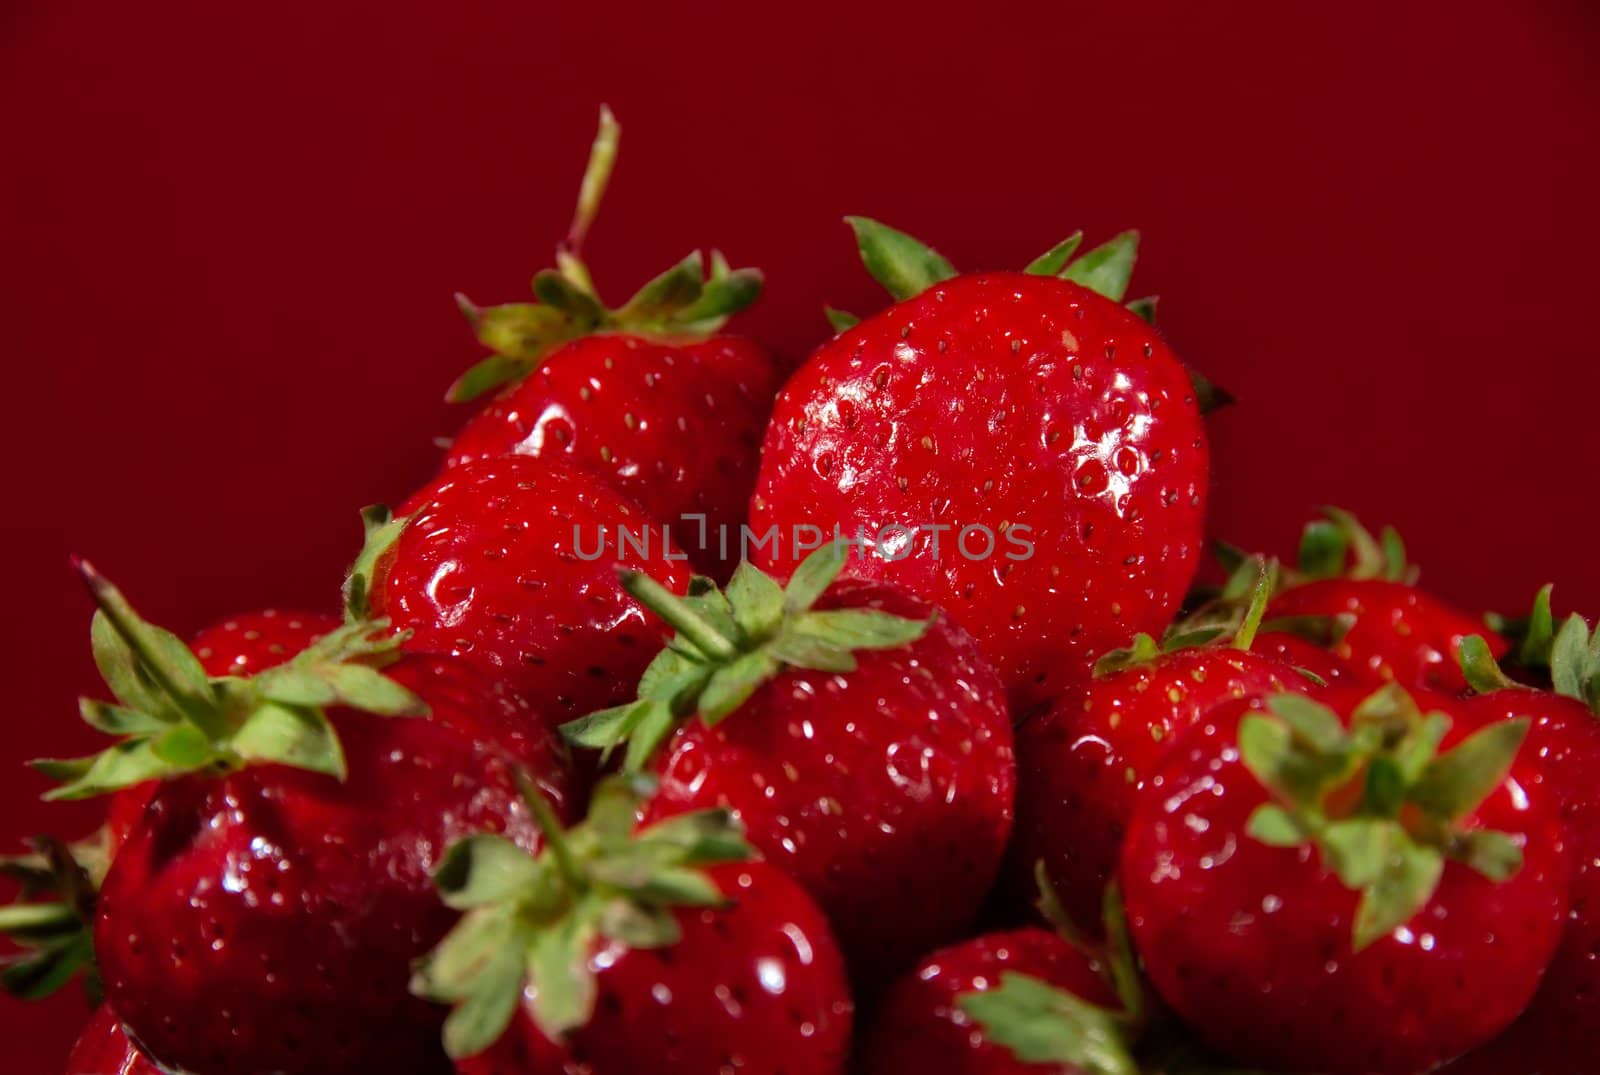 Shot of a pile of fresh strawberries